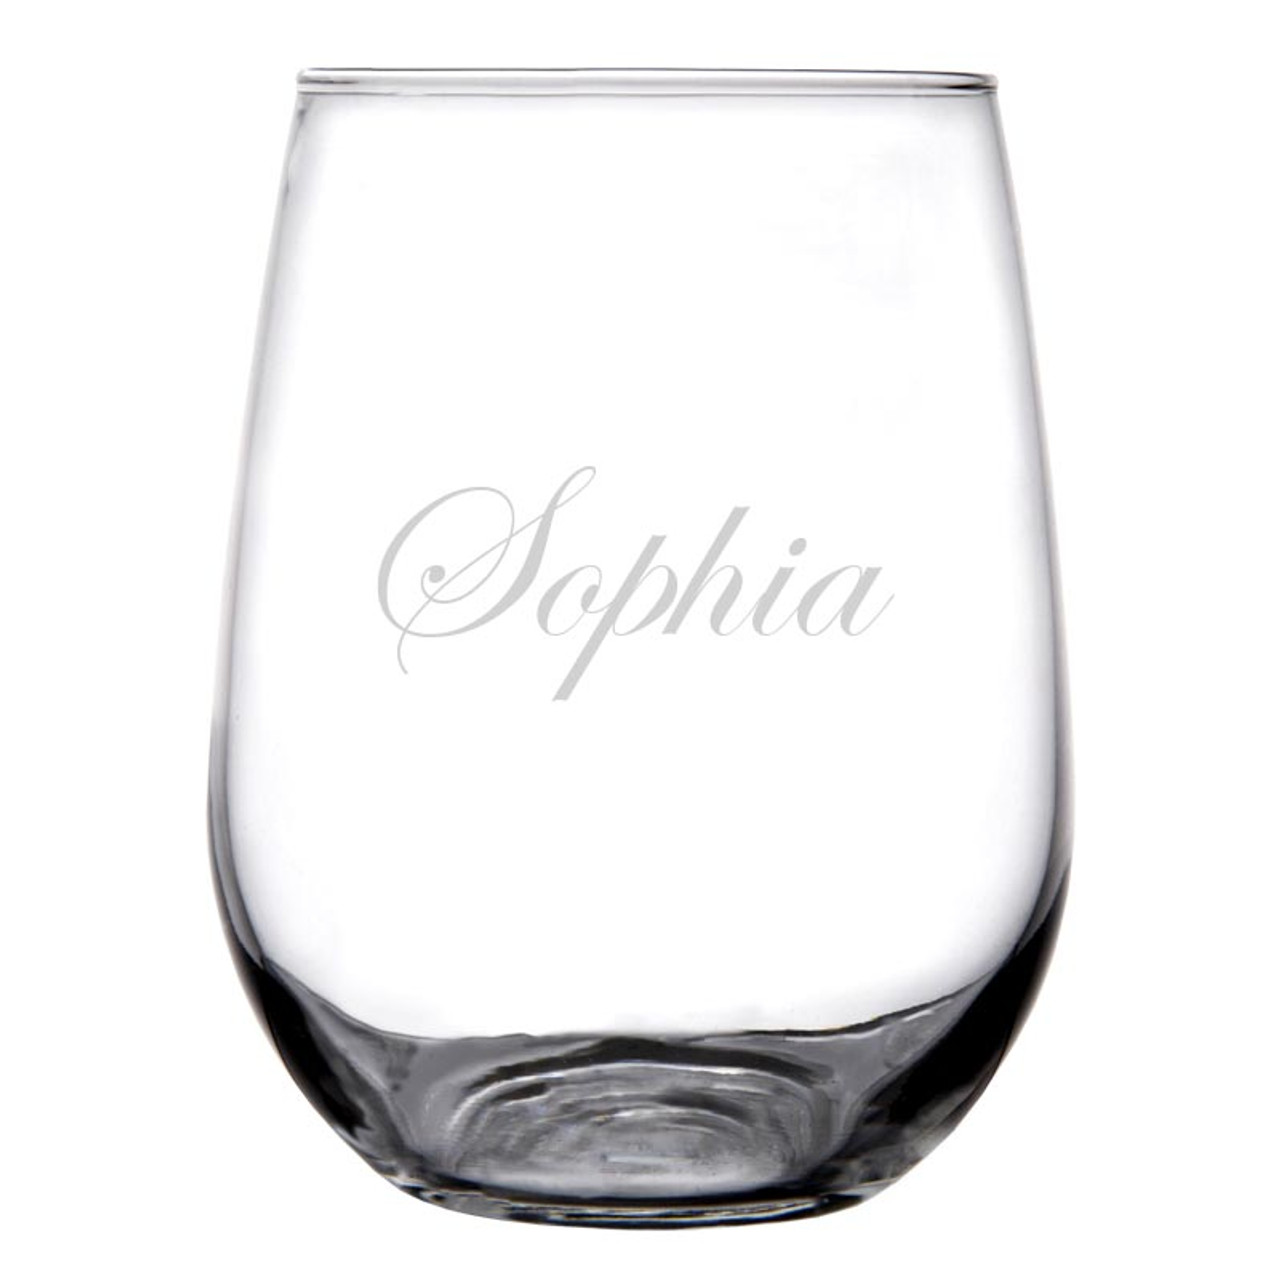 https://cdn11.bigcommerce.com/s-d22a0/images/stencil/1280x1280/products/2487/11704/personalized-stemless-wine-glasses-name-script-edwardian-GLS704_stemless__02321.1627563500.jpg?c=2